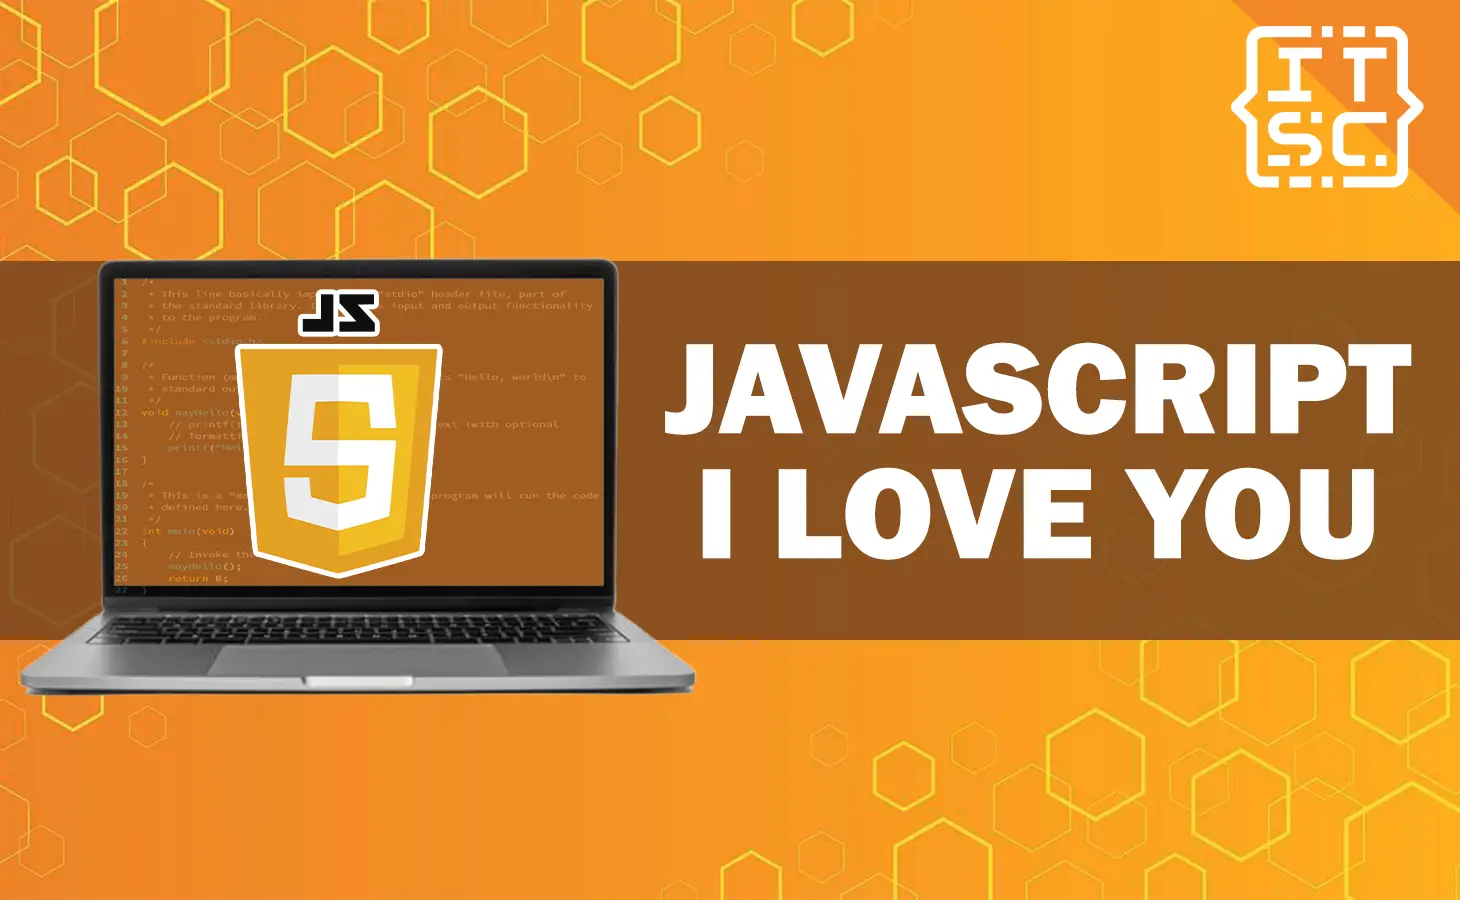 How to say "I love you" in JavaScript?